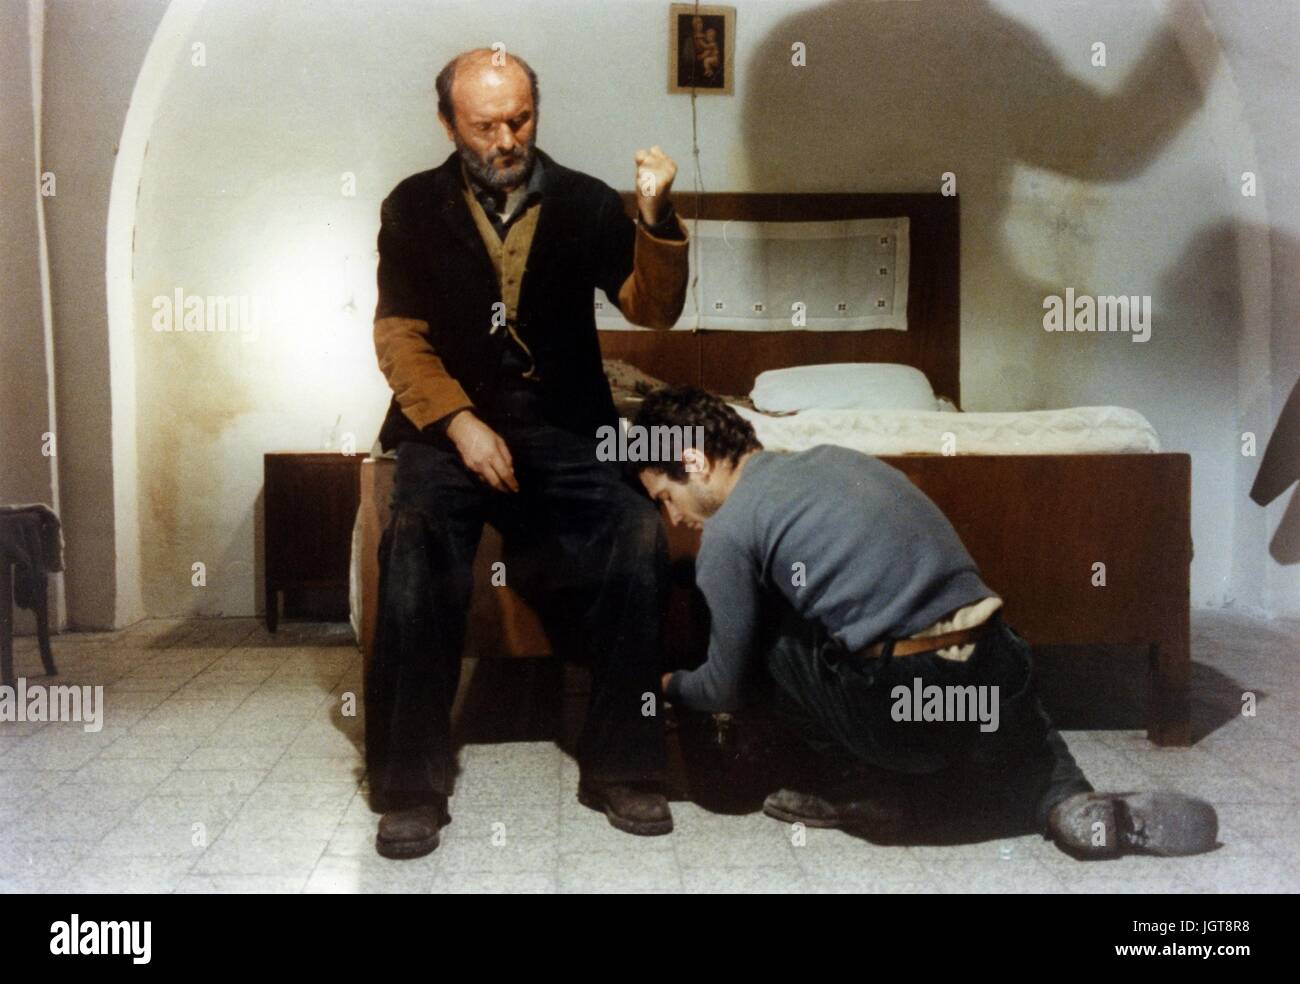 Padre padrone   Year : 1977 Italie  Director : Paolo Taviani  Omero Antonutti, Saverio Marconi    Palme d'or Cannes 1977   Photo: Umberto Montiroli.  It is forbidden to reproduce the photograph out of context of the promotion of the film. It must be credited to the Film Company and/or the photographer assigned by or authorized by/allowed on the set by the Film Company. Restricted to Editorial Use. Photo12 does not grant publicity rights of the persons represented. Stock Photo